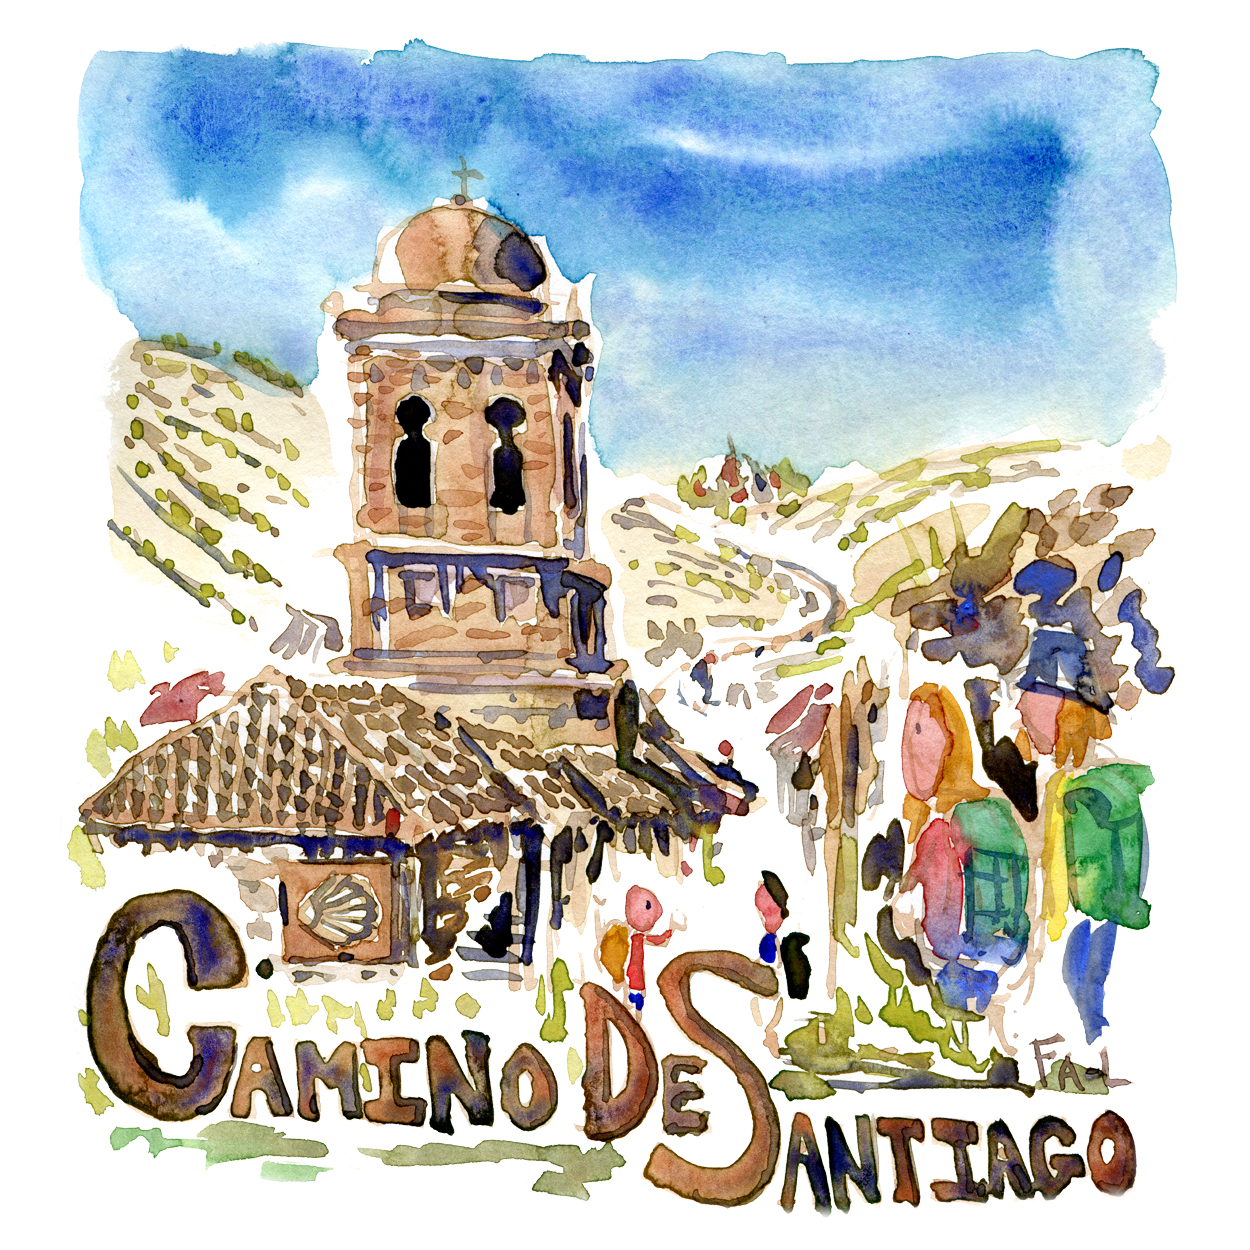 Watercolor of the Camino De Santiago pilgrimage trail, painting by Frits Ahlefeldt